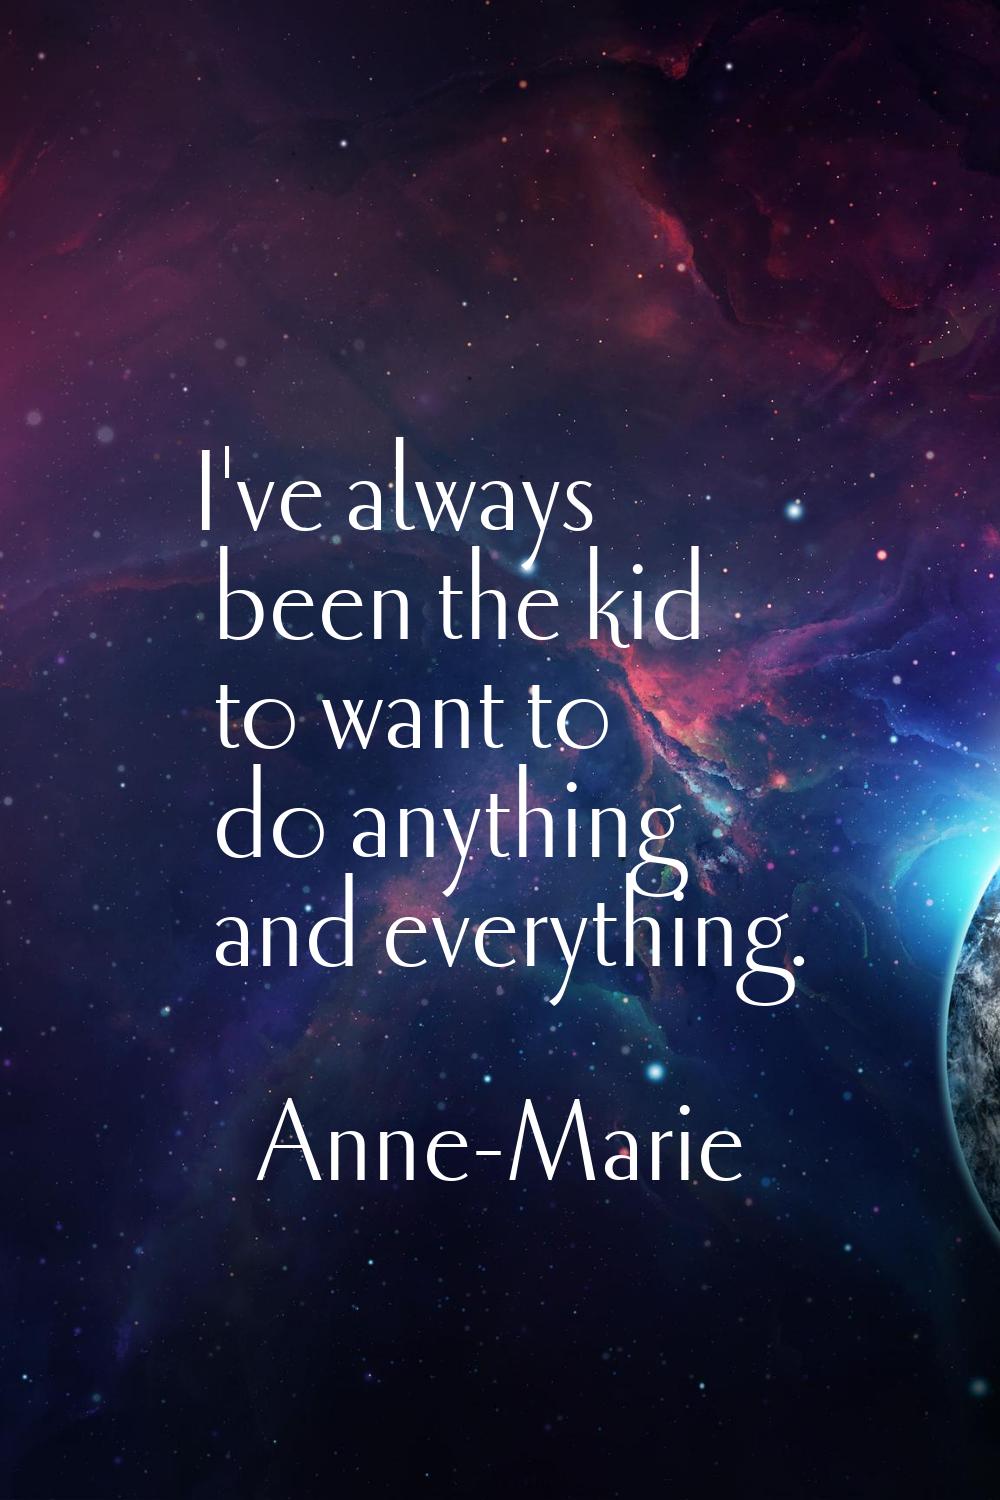 I've always been the kid to want to do anything and everything.